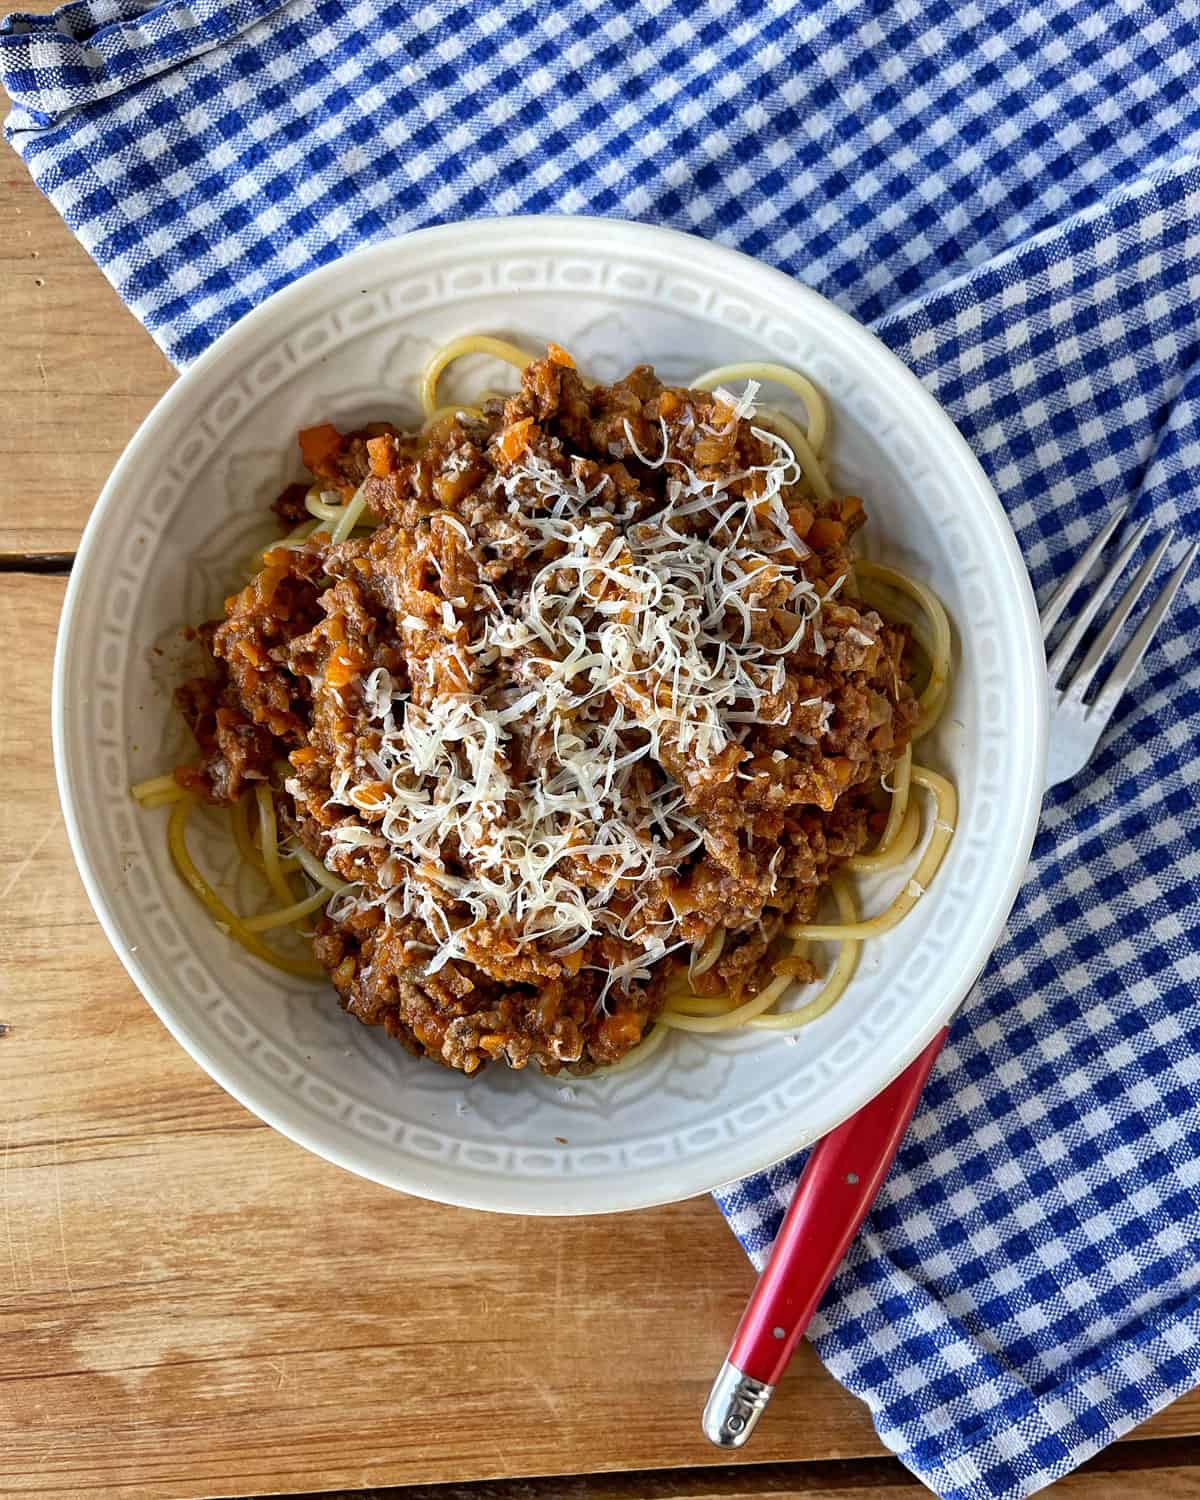 Spaghetti Bolognese in a white bowl sitting on a checked tablecloth.